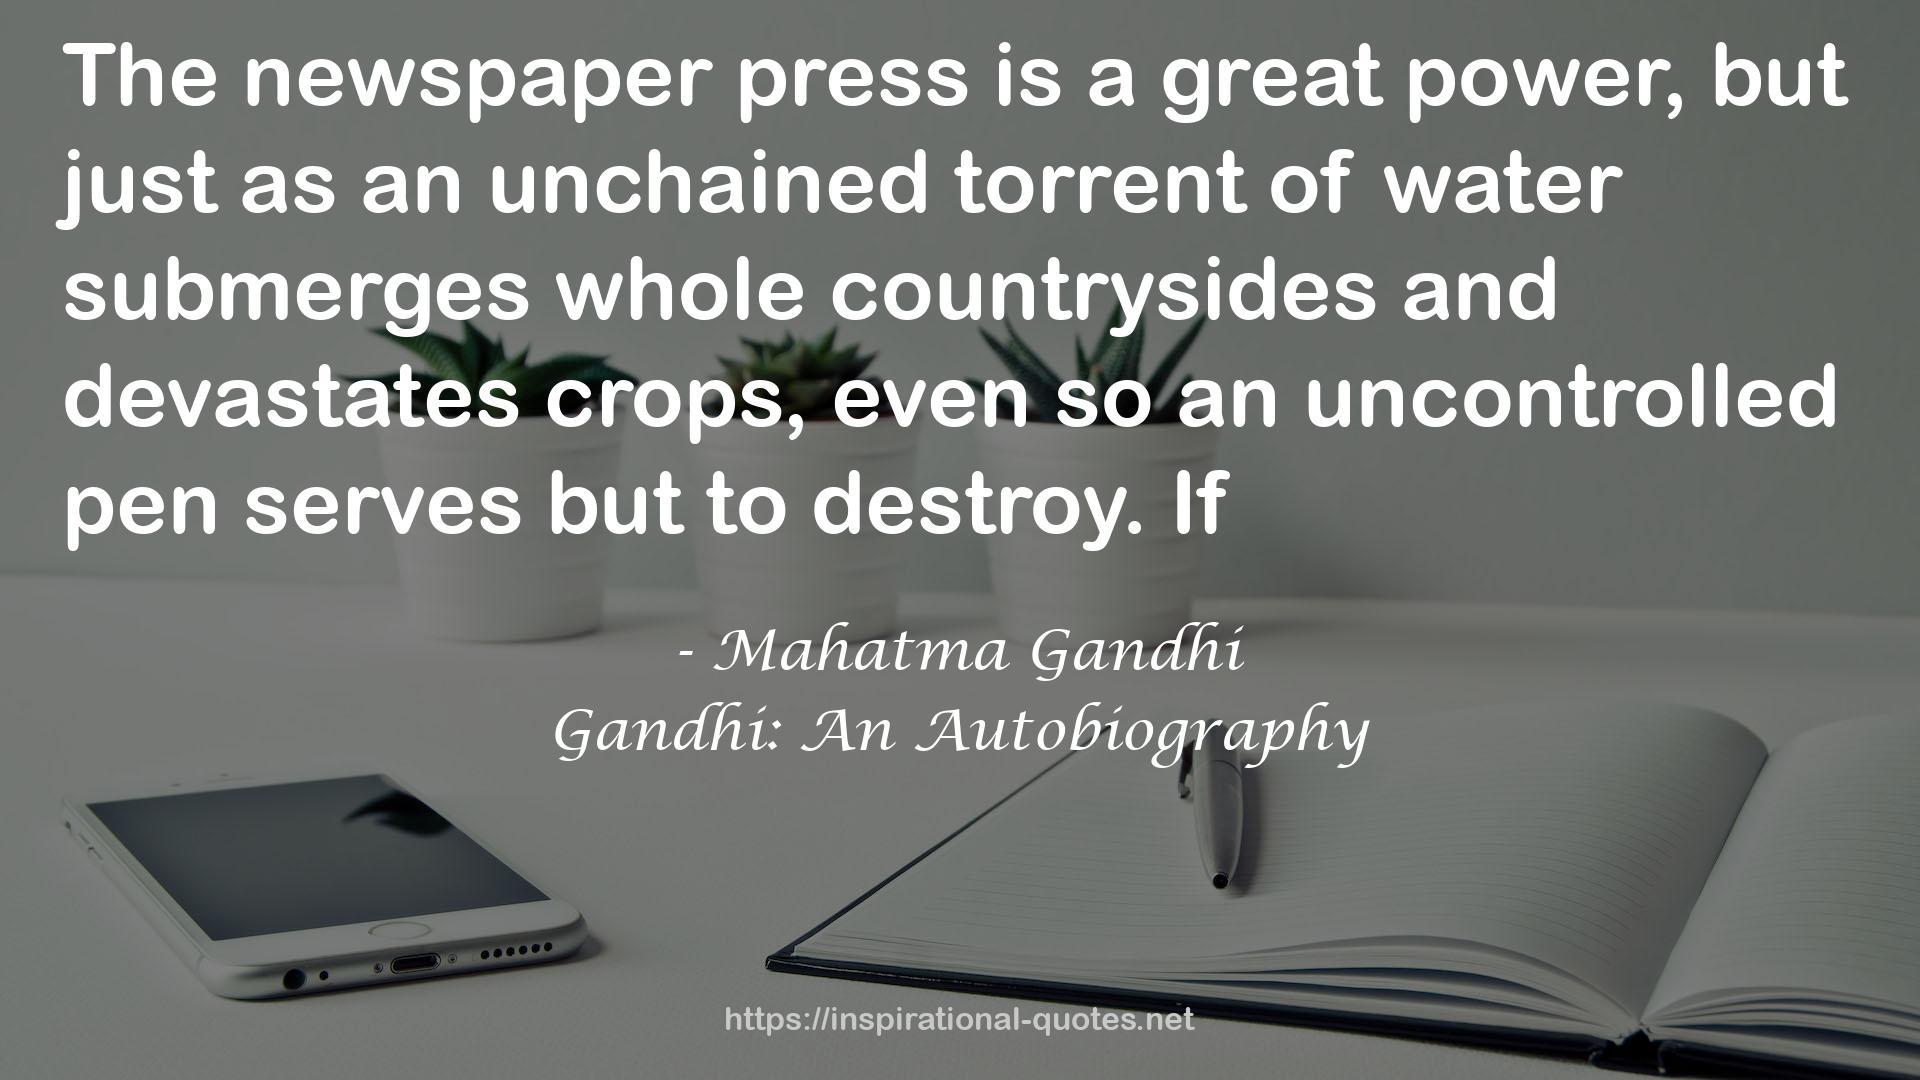 Gandhi: An Autobiography QUOTES